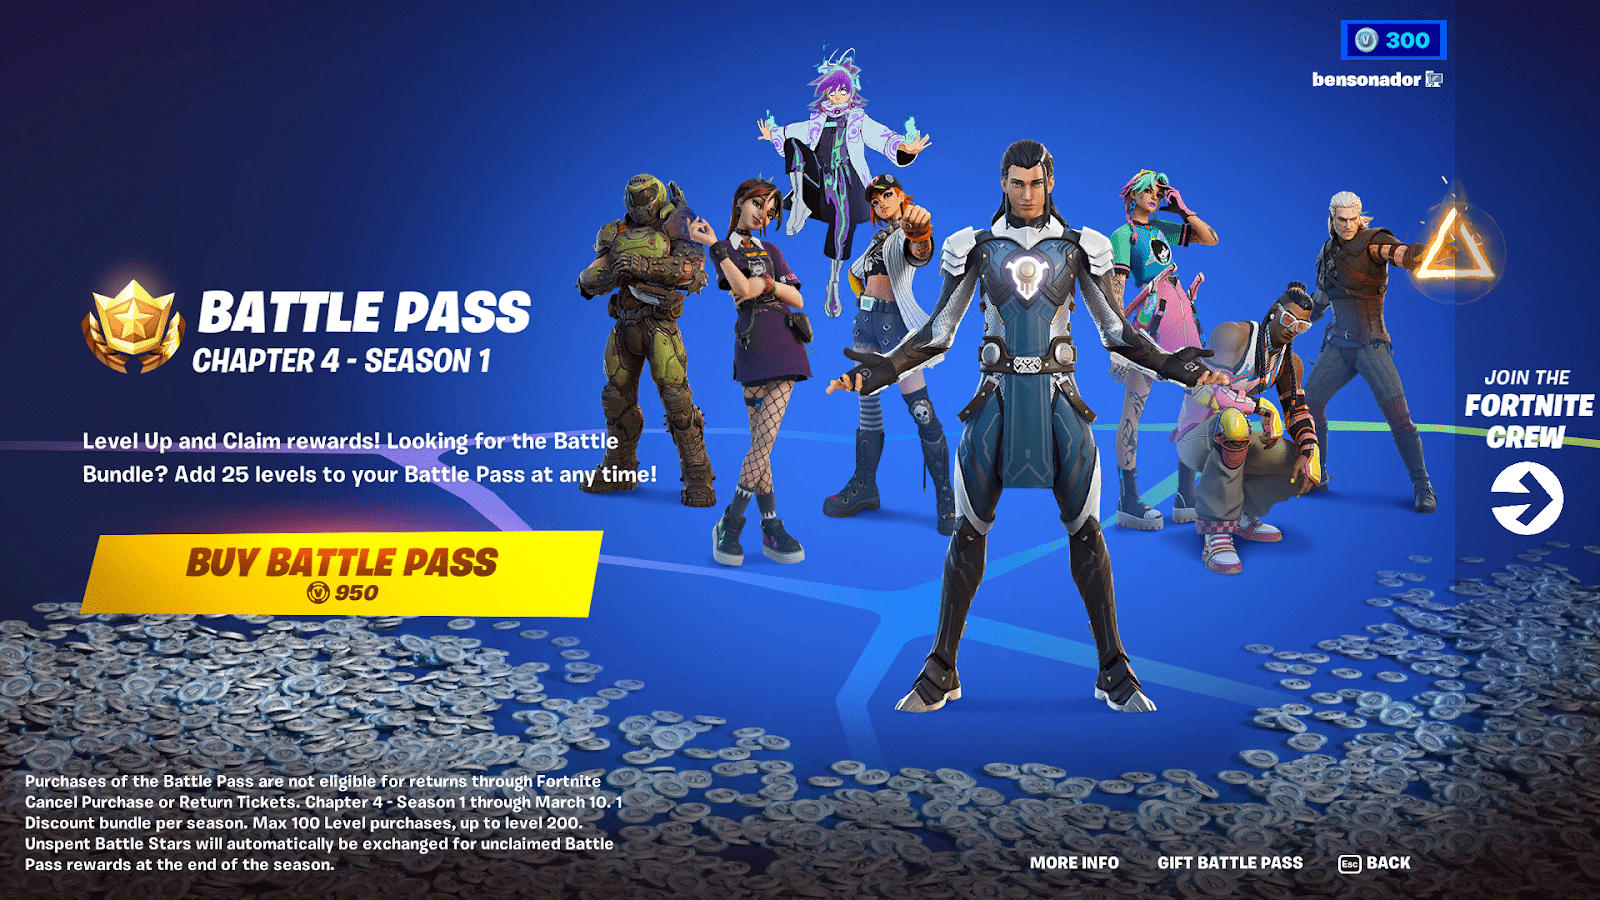 Fortnite Chapter 4 Season 1 Battle Pass: Price, Skins and Everything You Need To Know